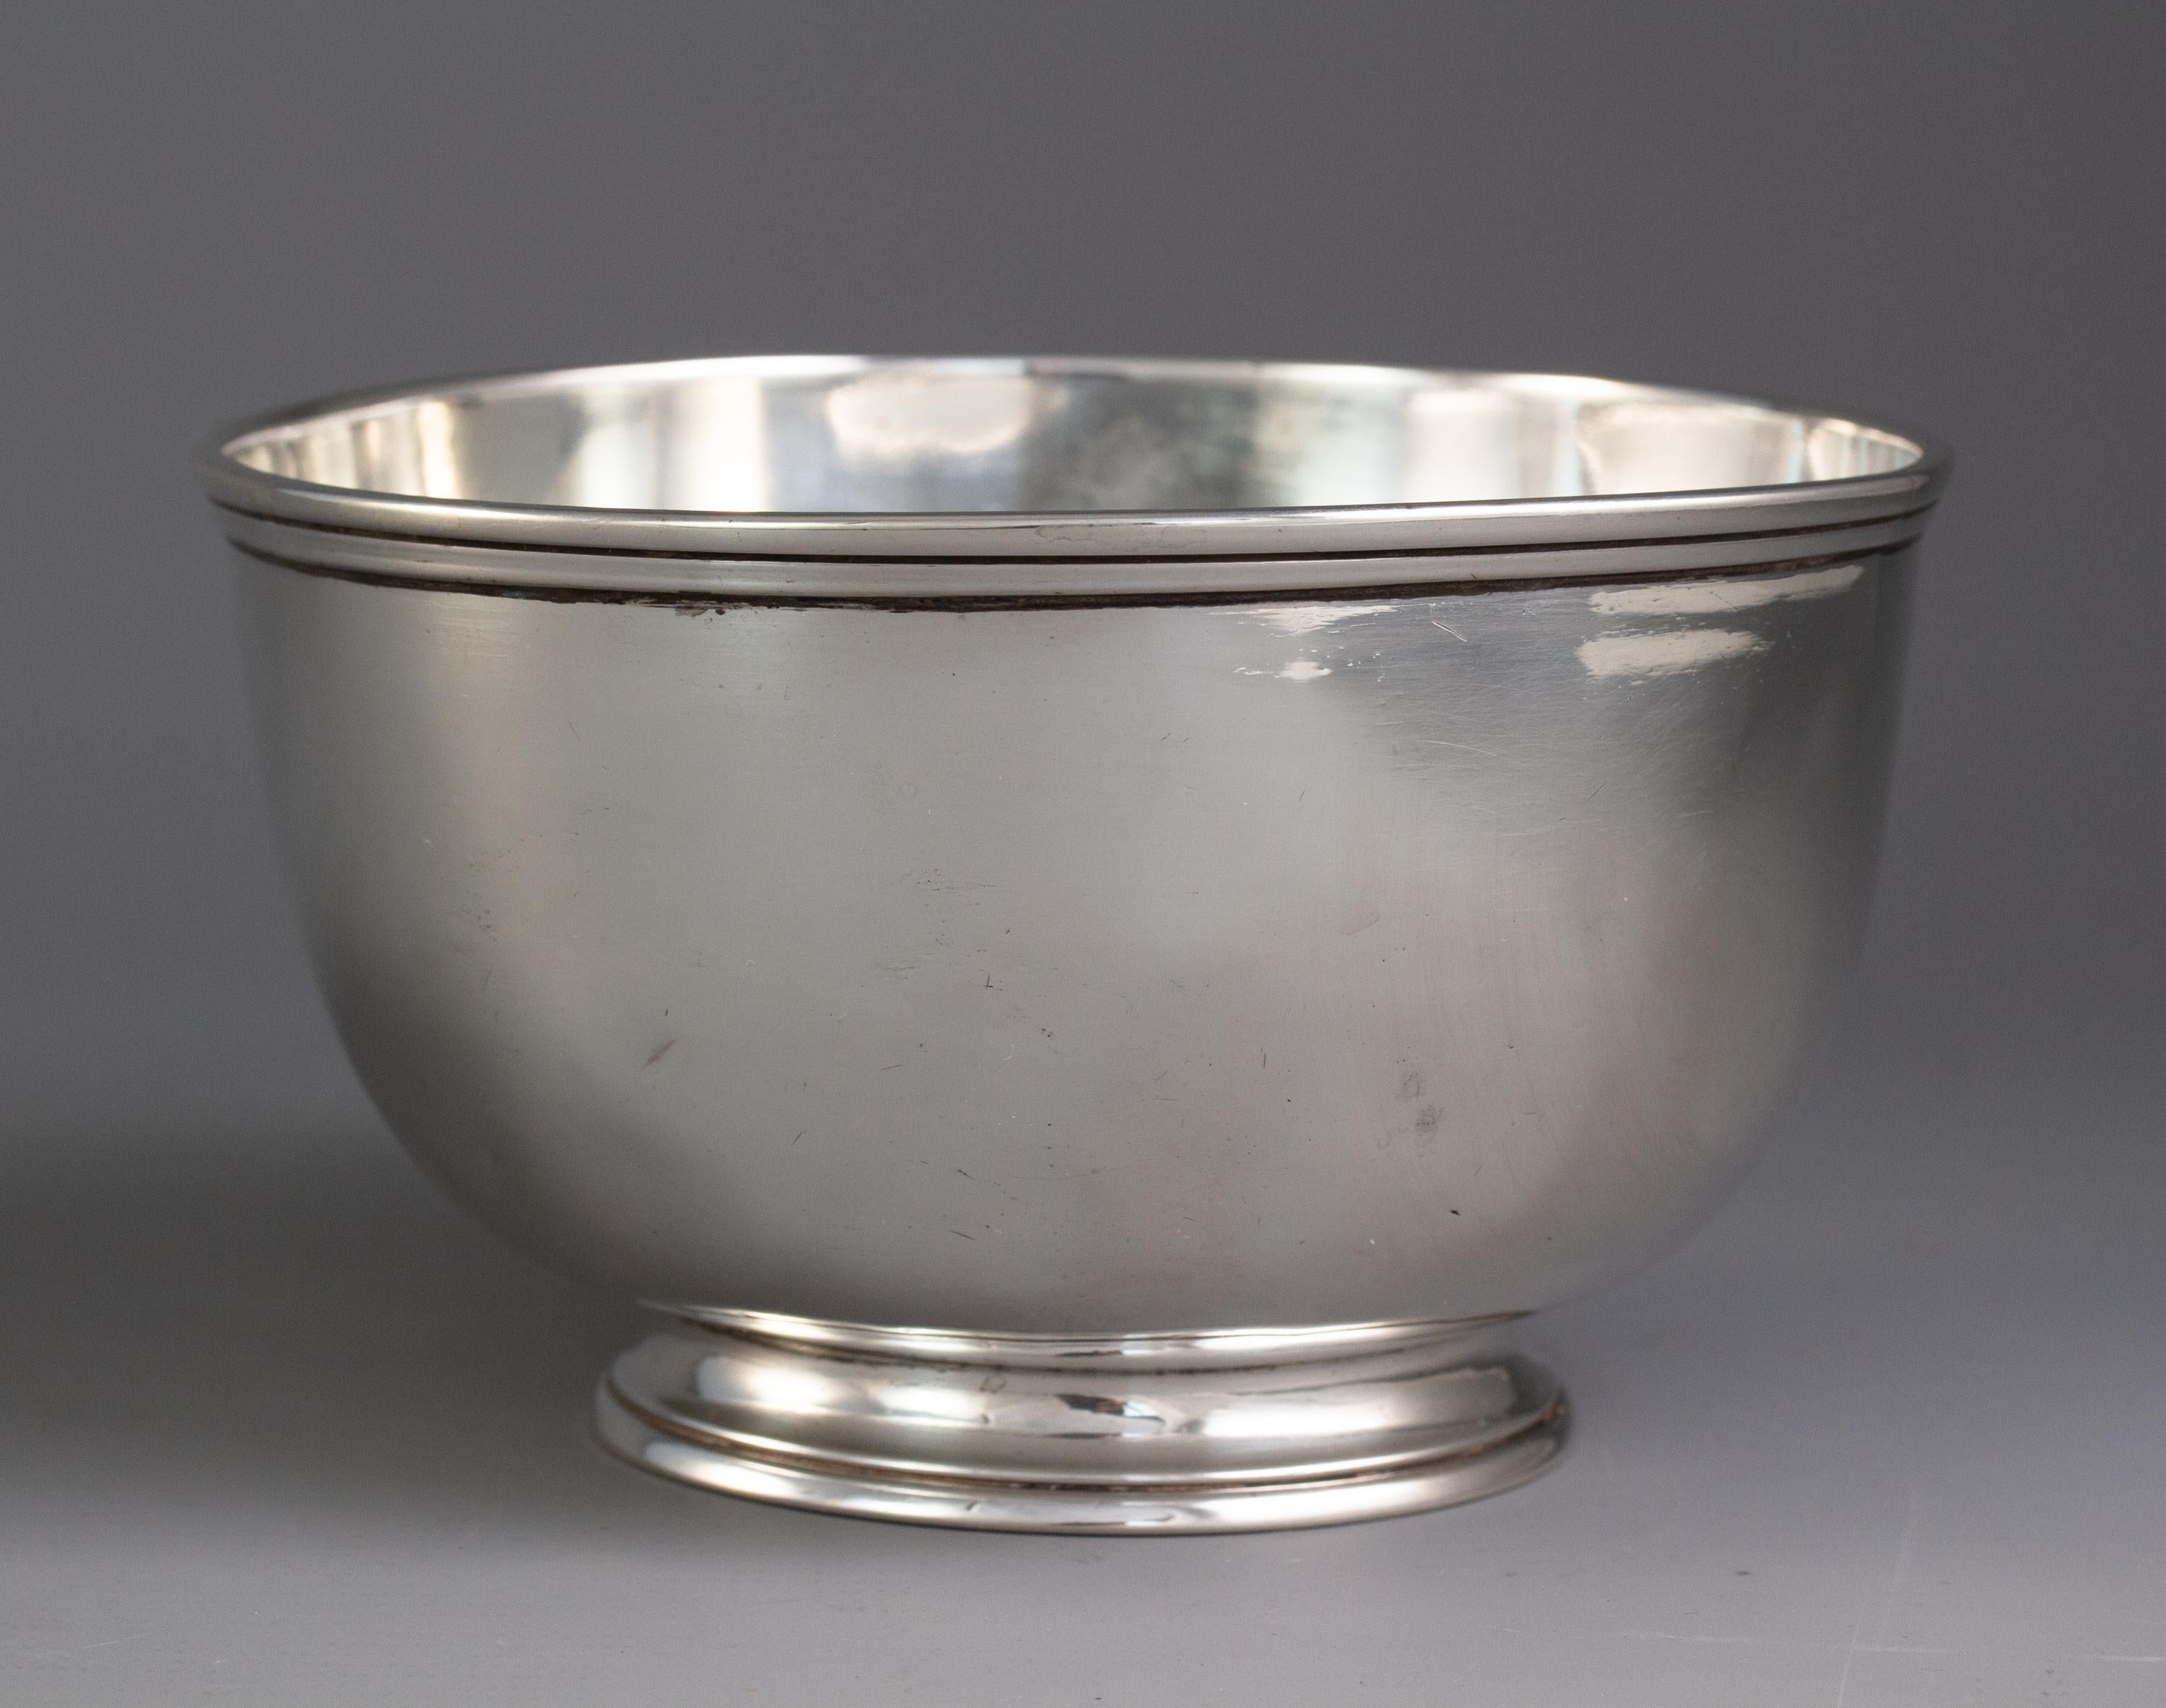 A George II silver sugar bowl of plain circular form, rising from a circular foot. The rim is decorated with a stepped circular band. Engraved to the side with a wolf rampant.

Clearly hallmarked for London 1743, with the maker’s mark SM over a